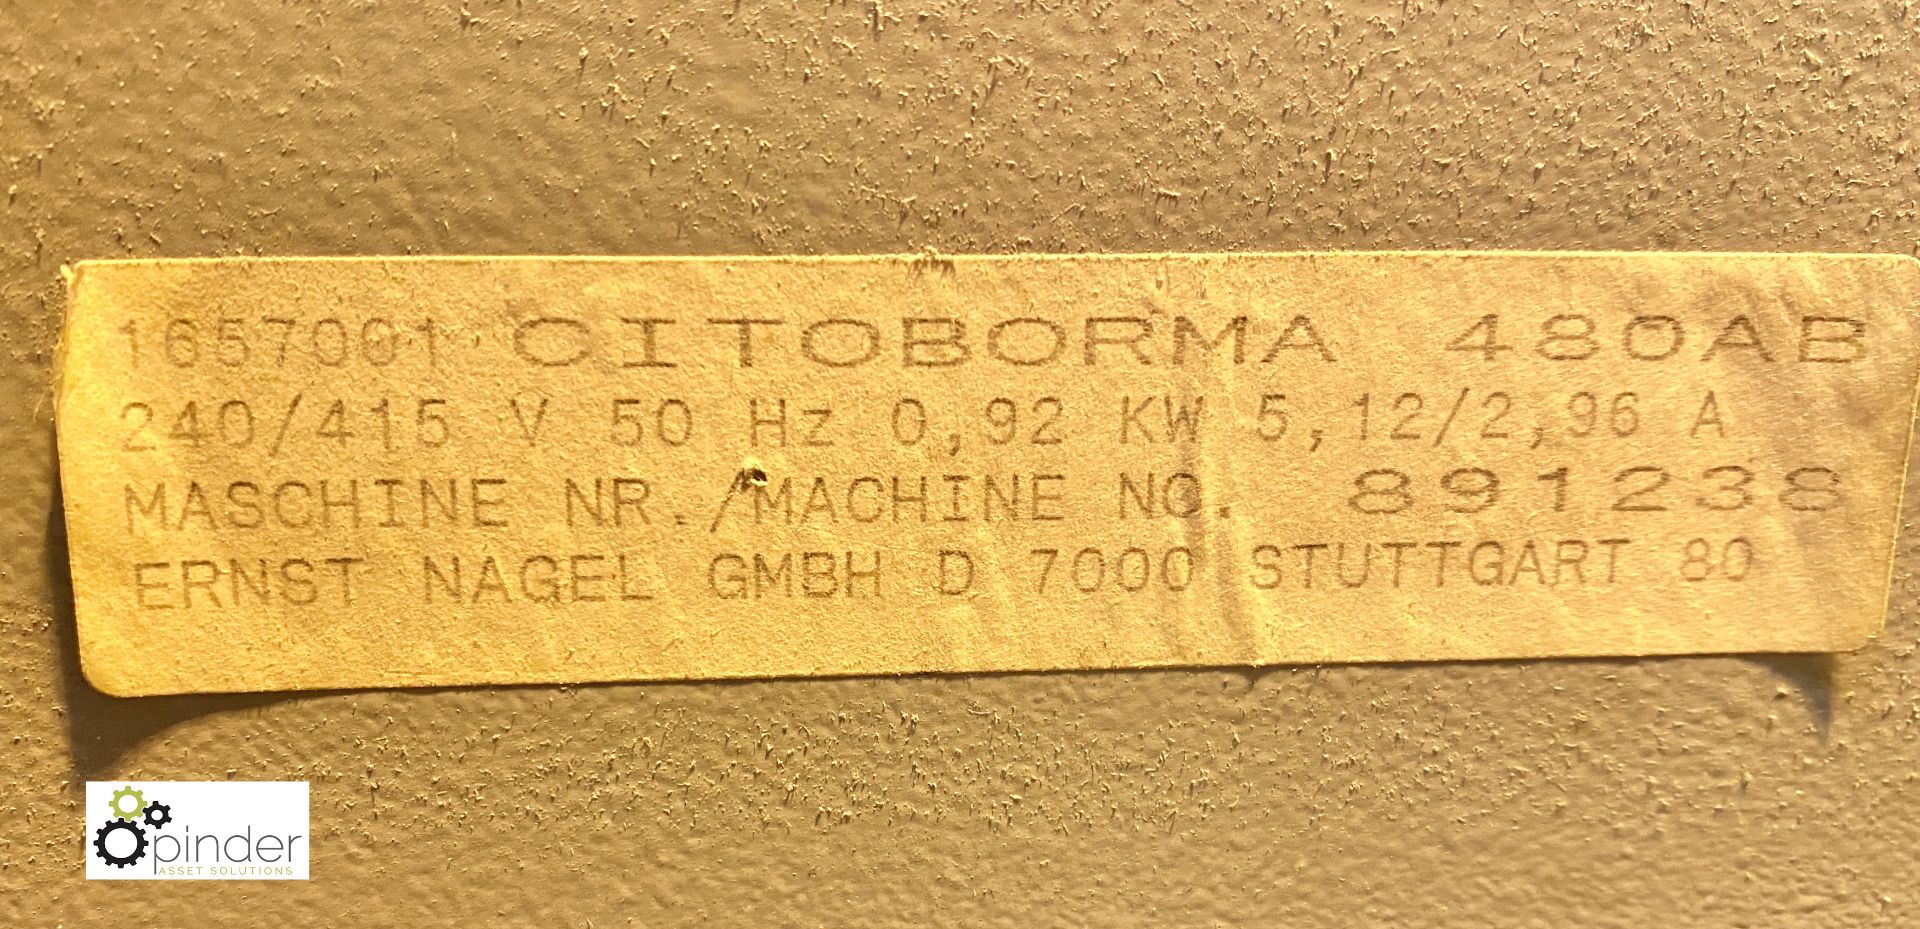 Citoborma 480AB 4-spindle Paper Drill, serial number 891238, 415volts (LOCATION: Chantry Bridge, - Image 5 of 6